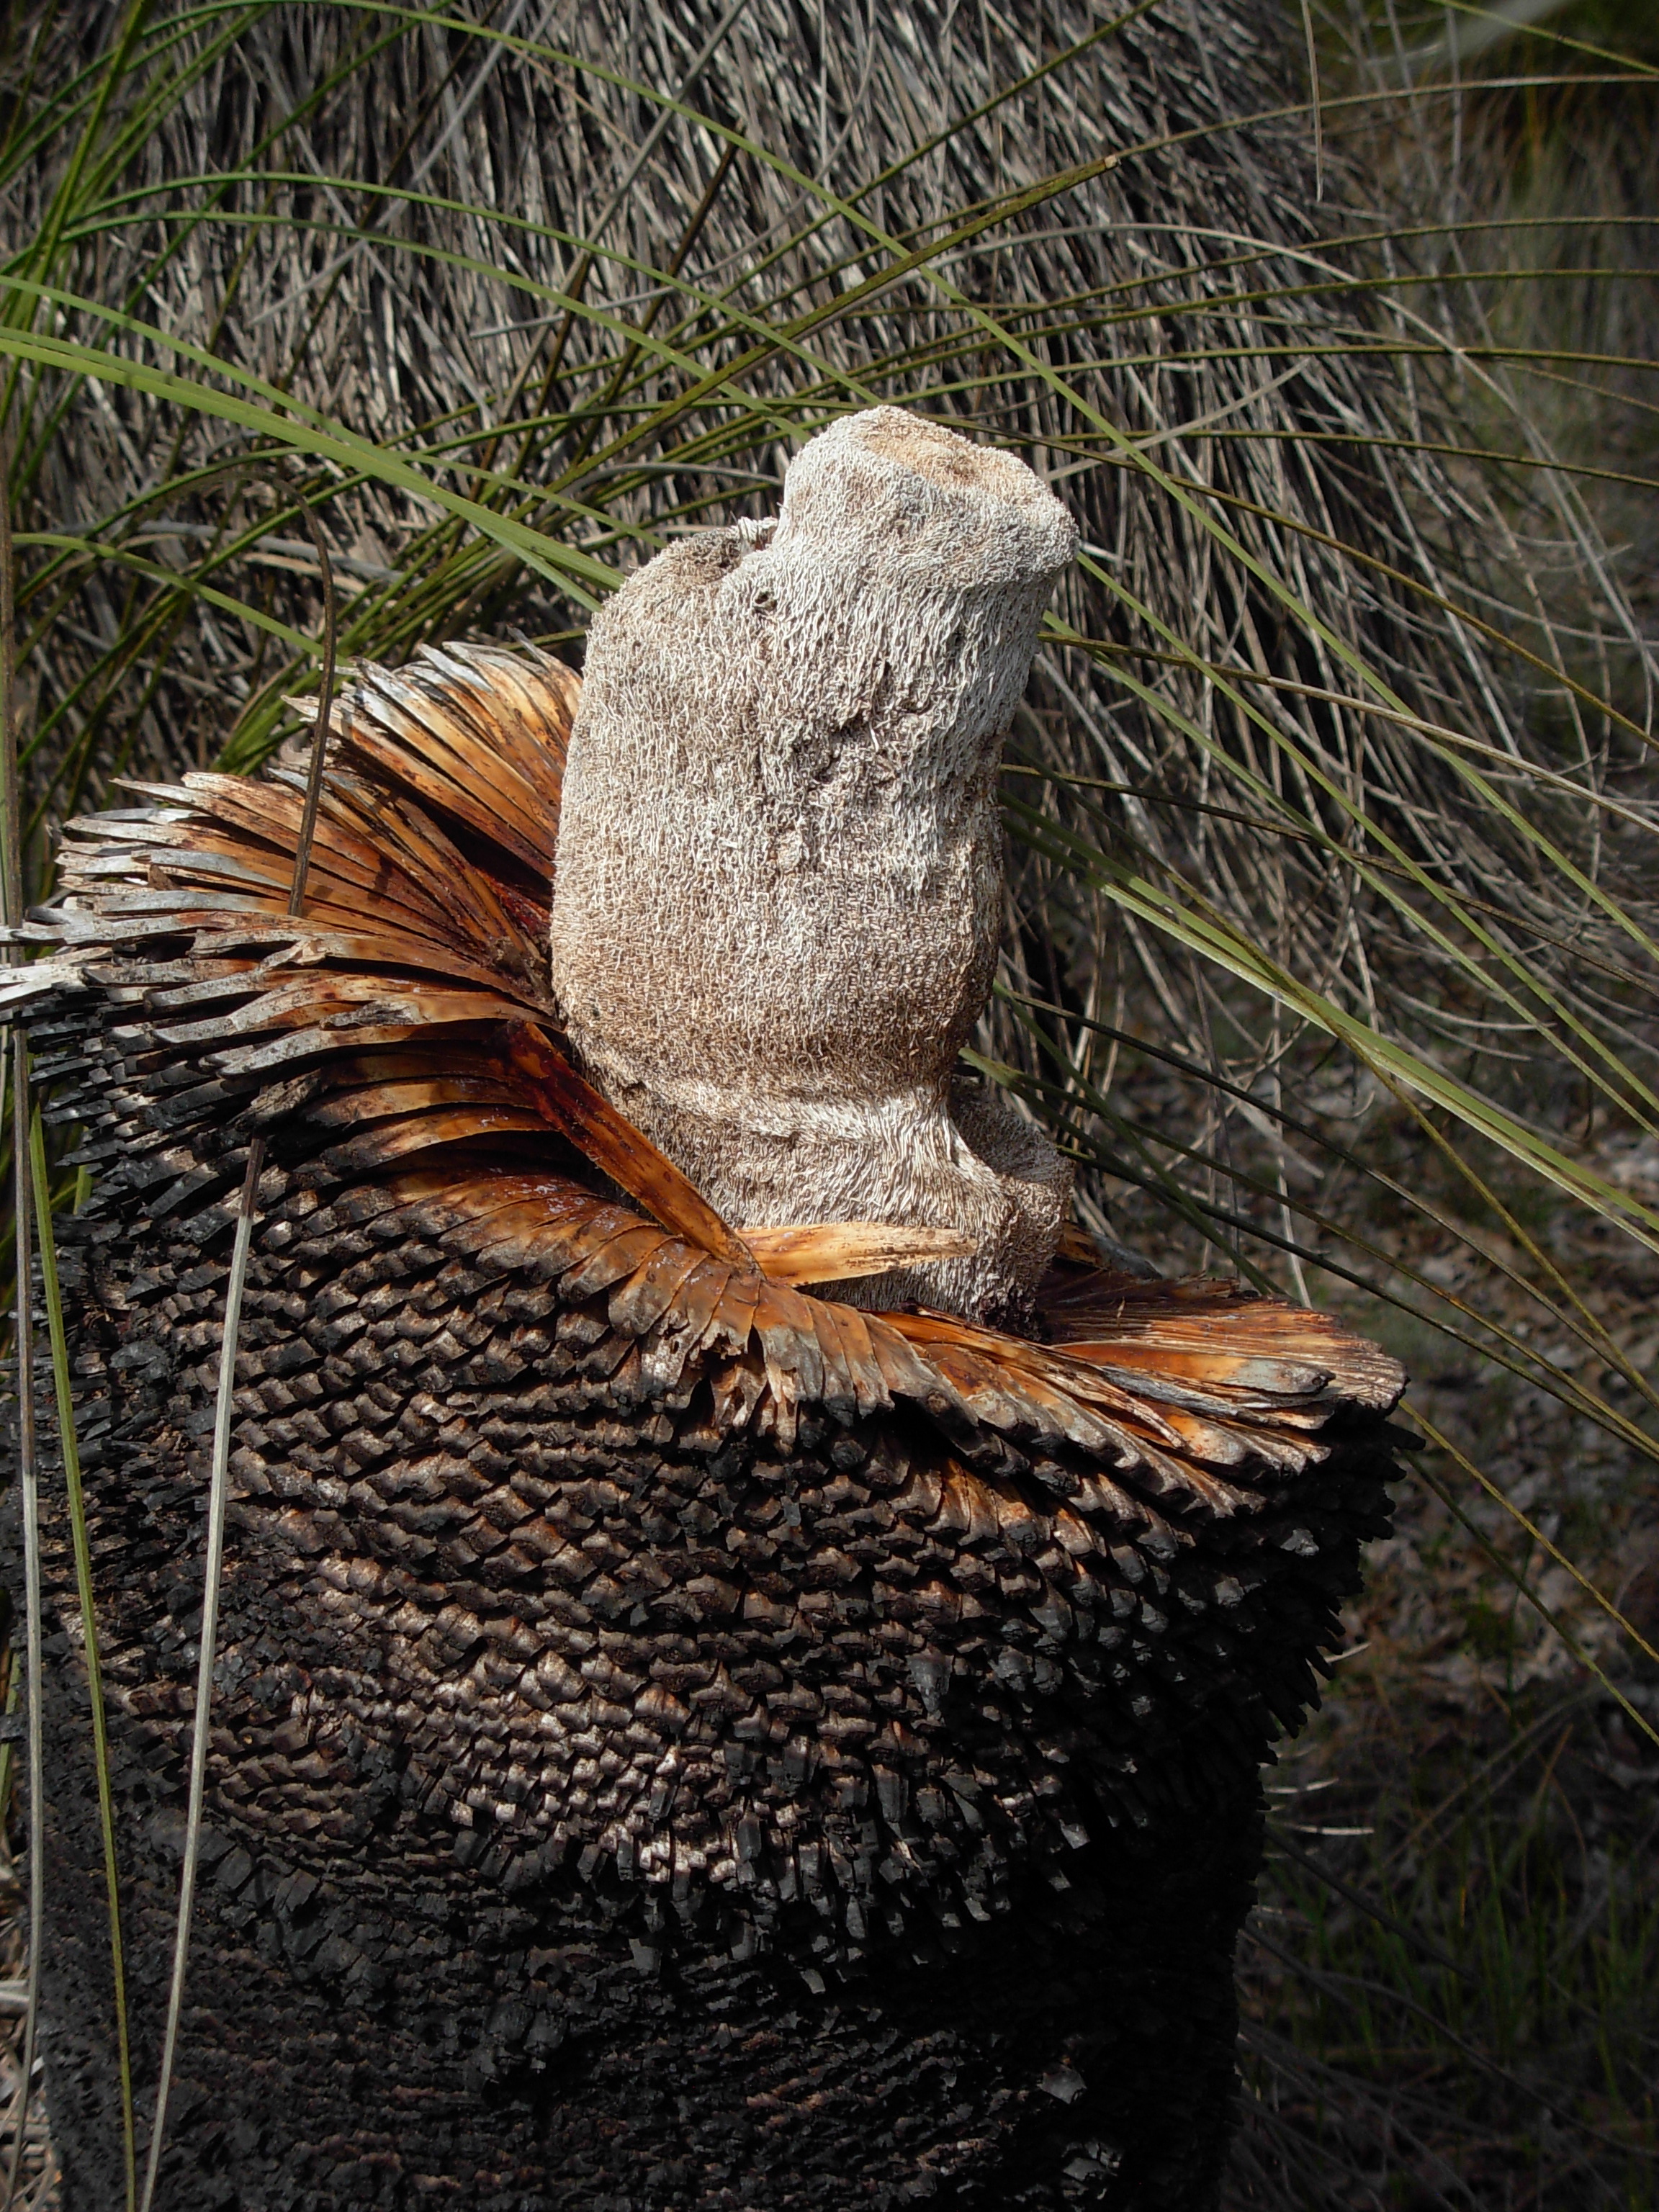 A broken balga or grass tree (Xanthorrhoea preissii) pseudo-trunk. This is a good illustration of the structure of the 